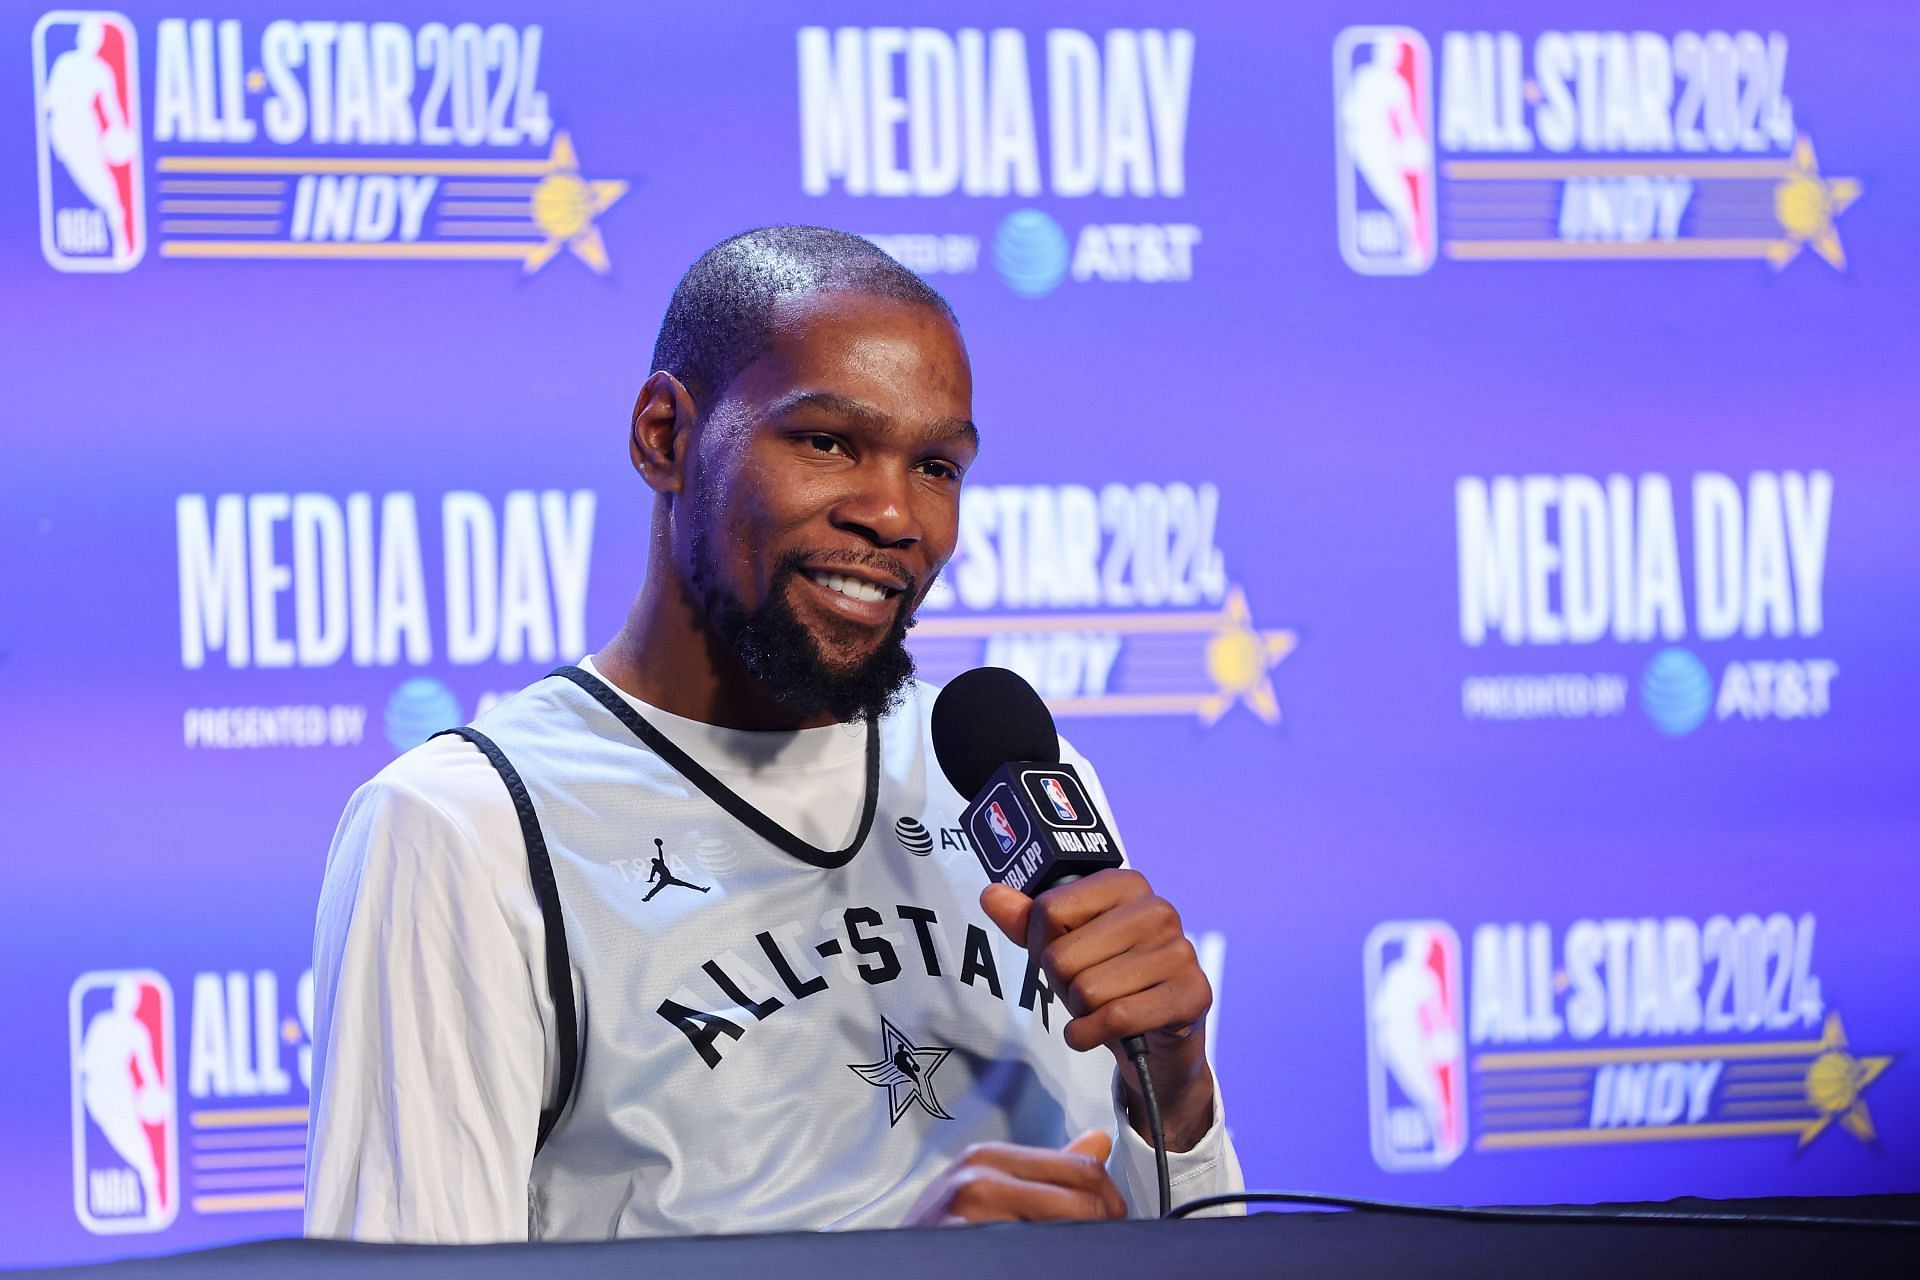 What did Kevin Durant say about the Knicks back in 2019?